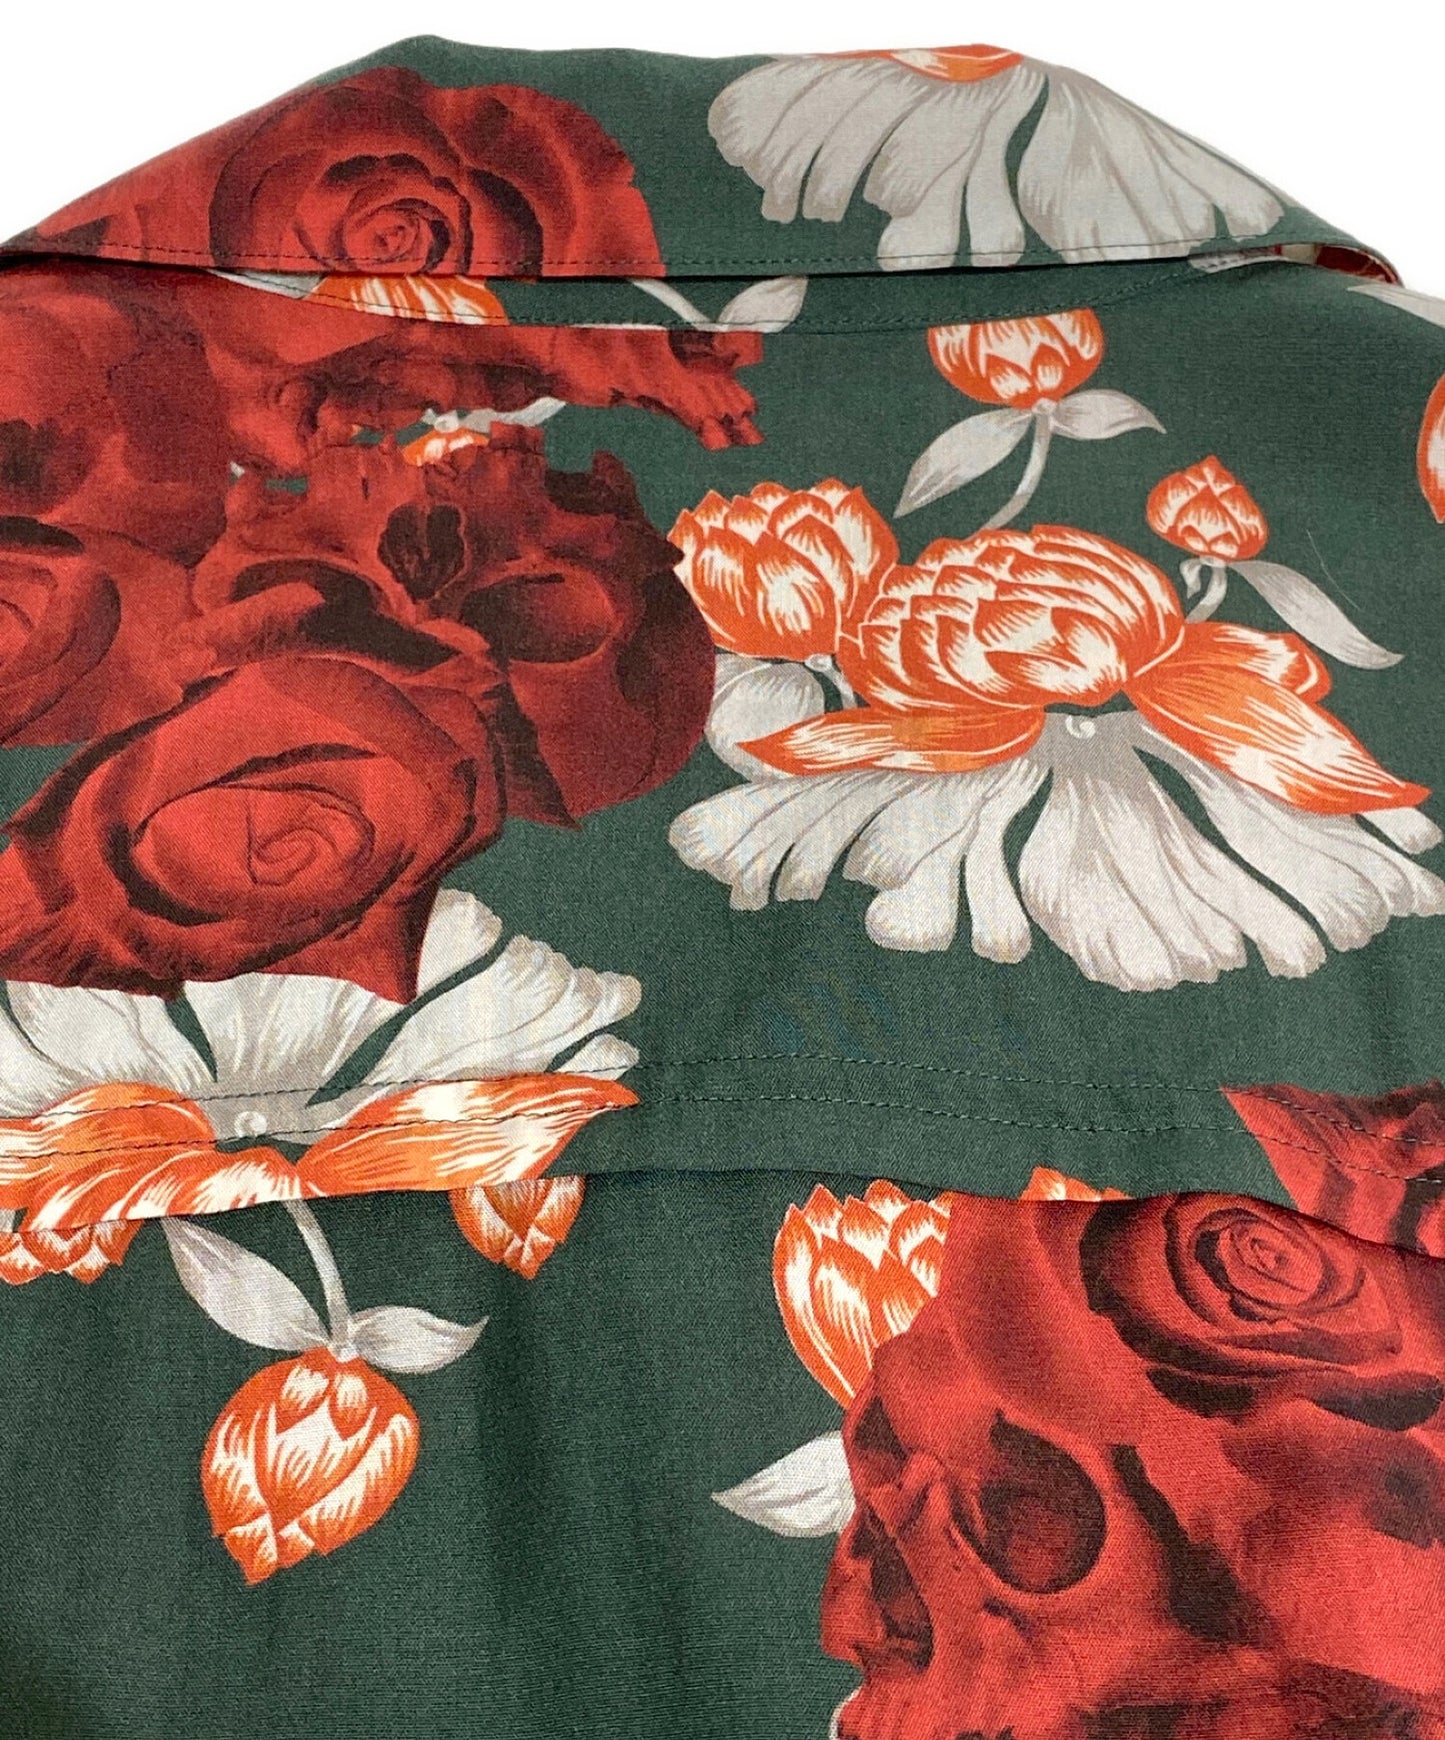 [Pre-owned] UNDERCOVER FLOWER SHIRT UC1A4407-2